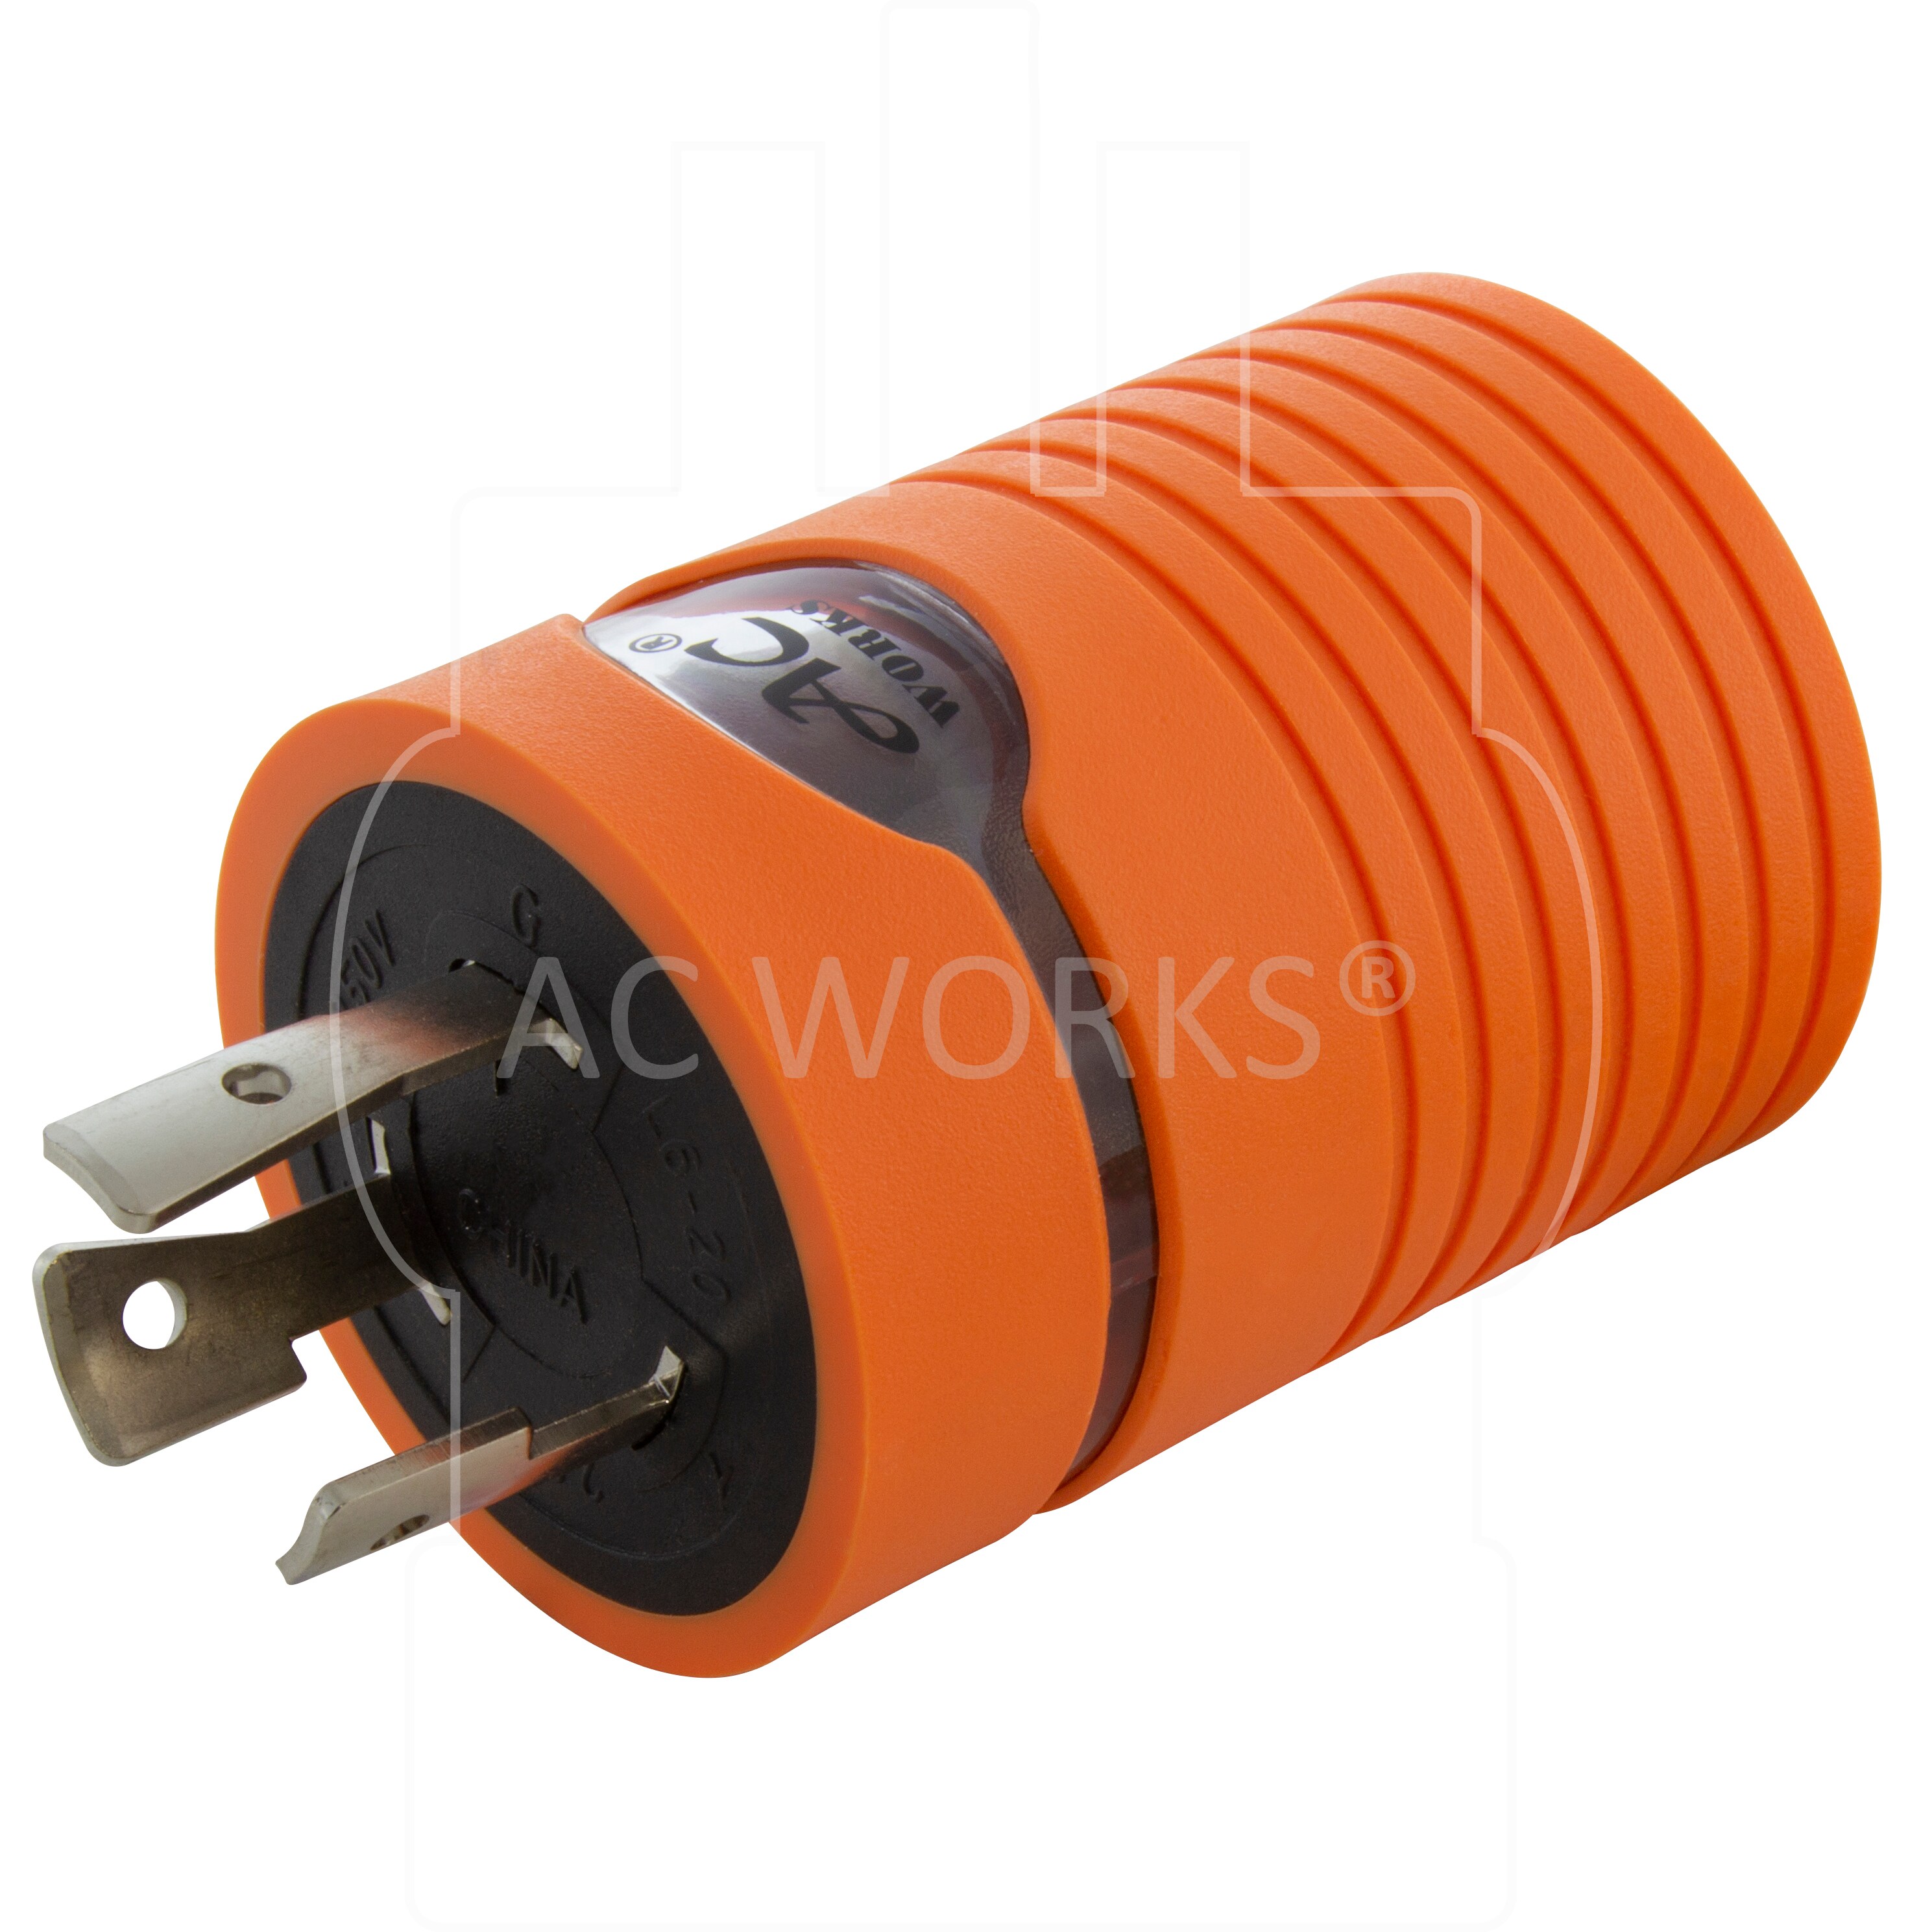 20A NEMA L14-20P to 20A NEMA 6-20R Adapter With 20 Amp Breaker by AC WORKS® 